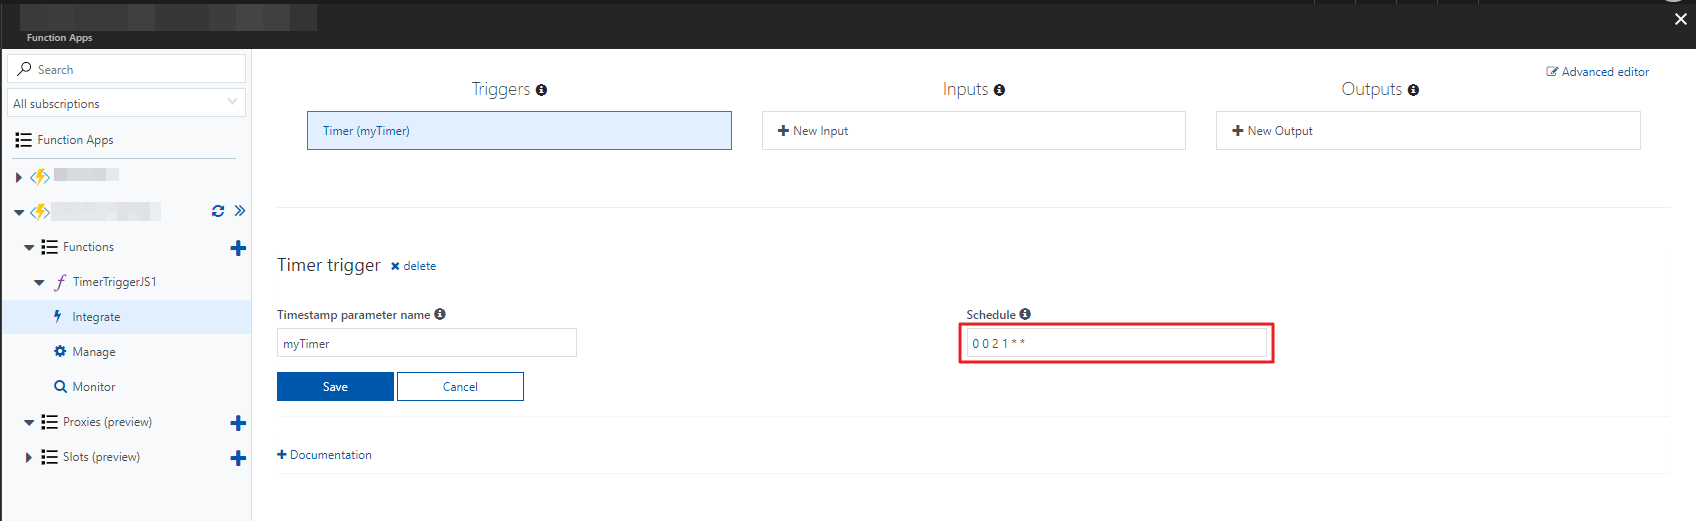 Screenshot: User sets up the scheduler usin g Cron expressions in the 'Schedule' field on Azure Functions.